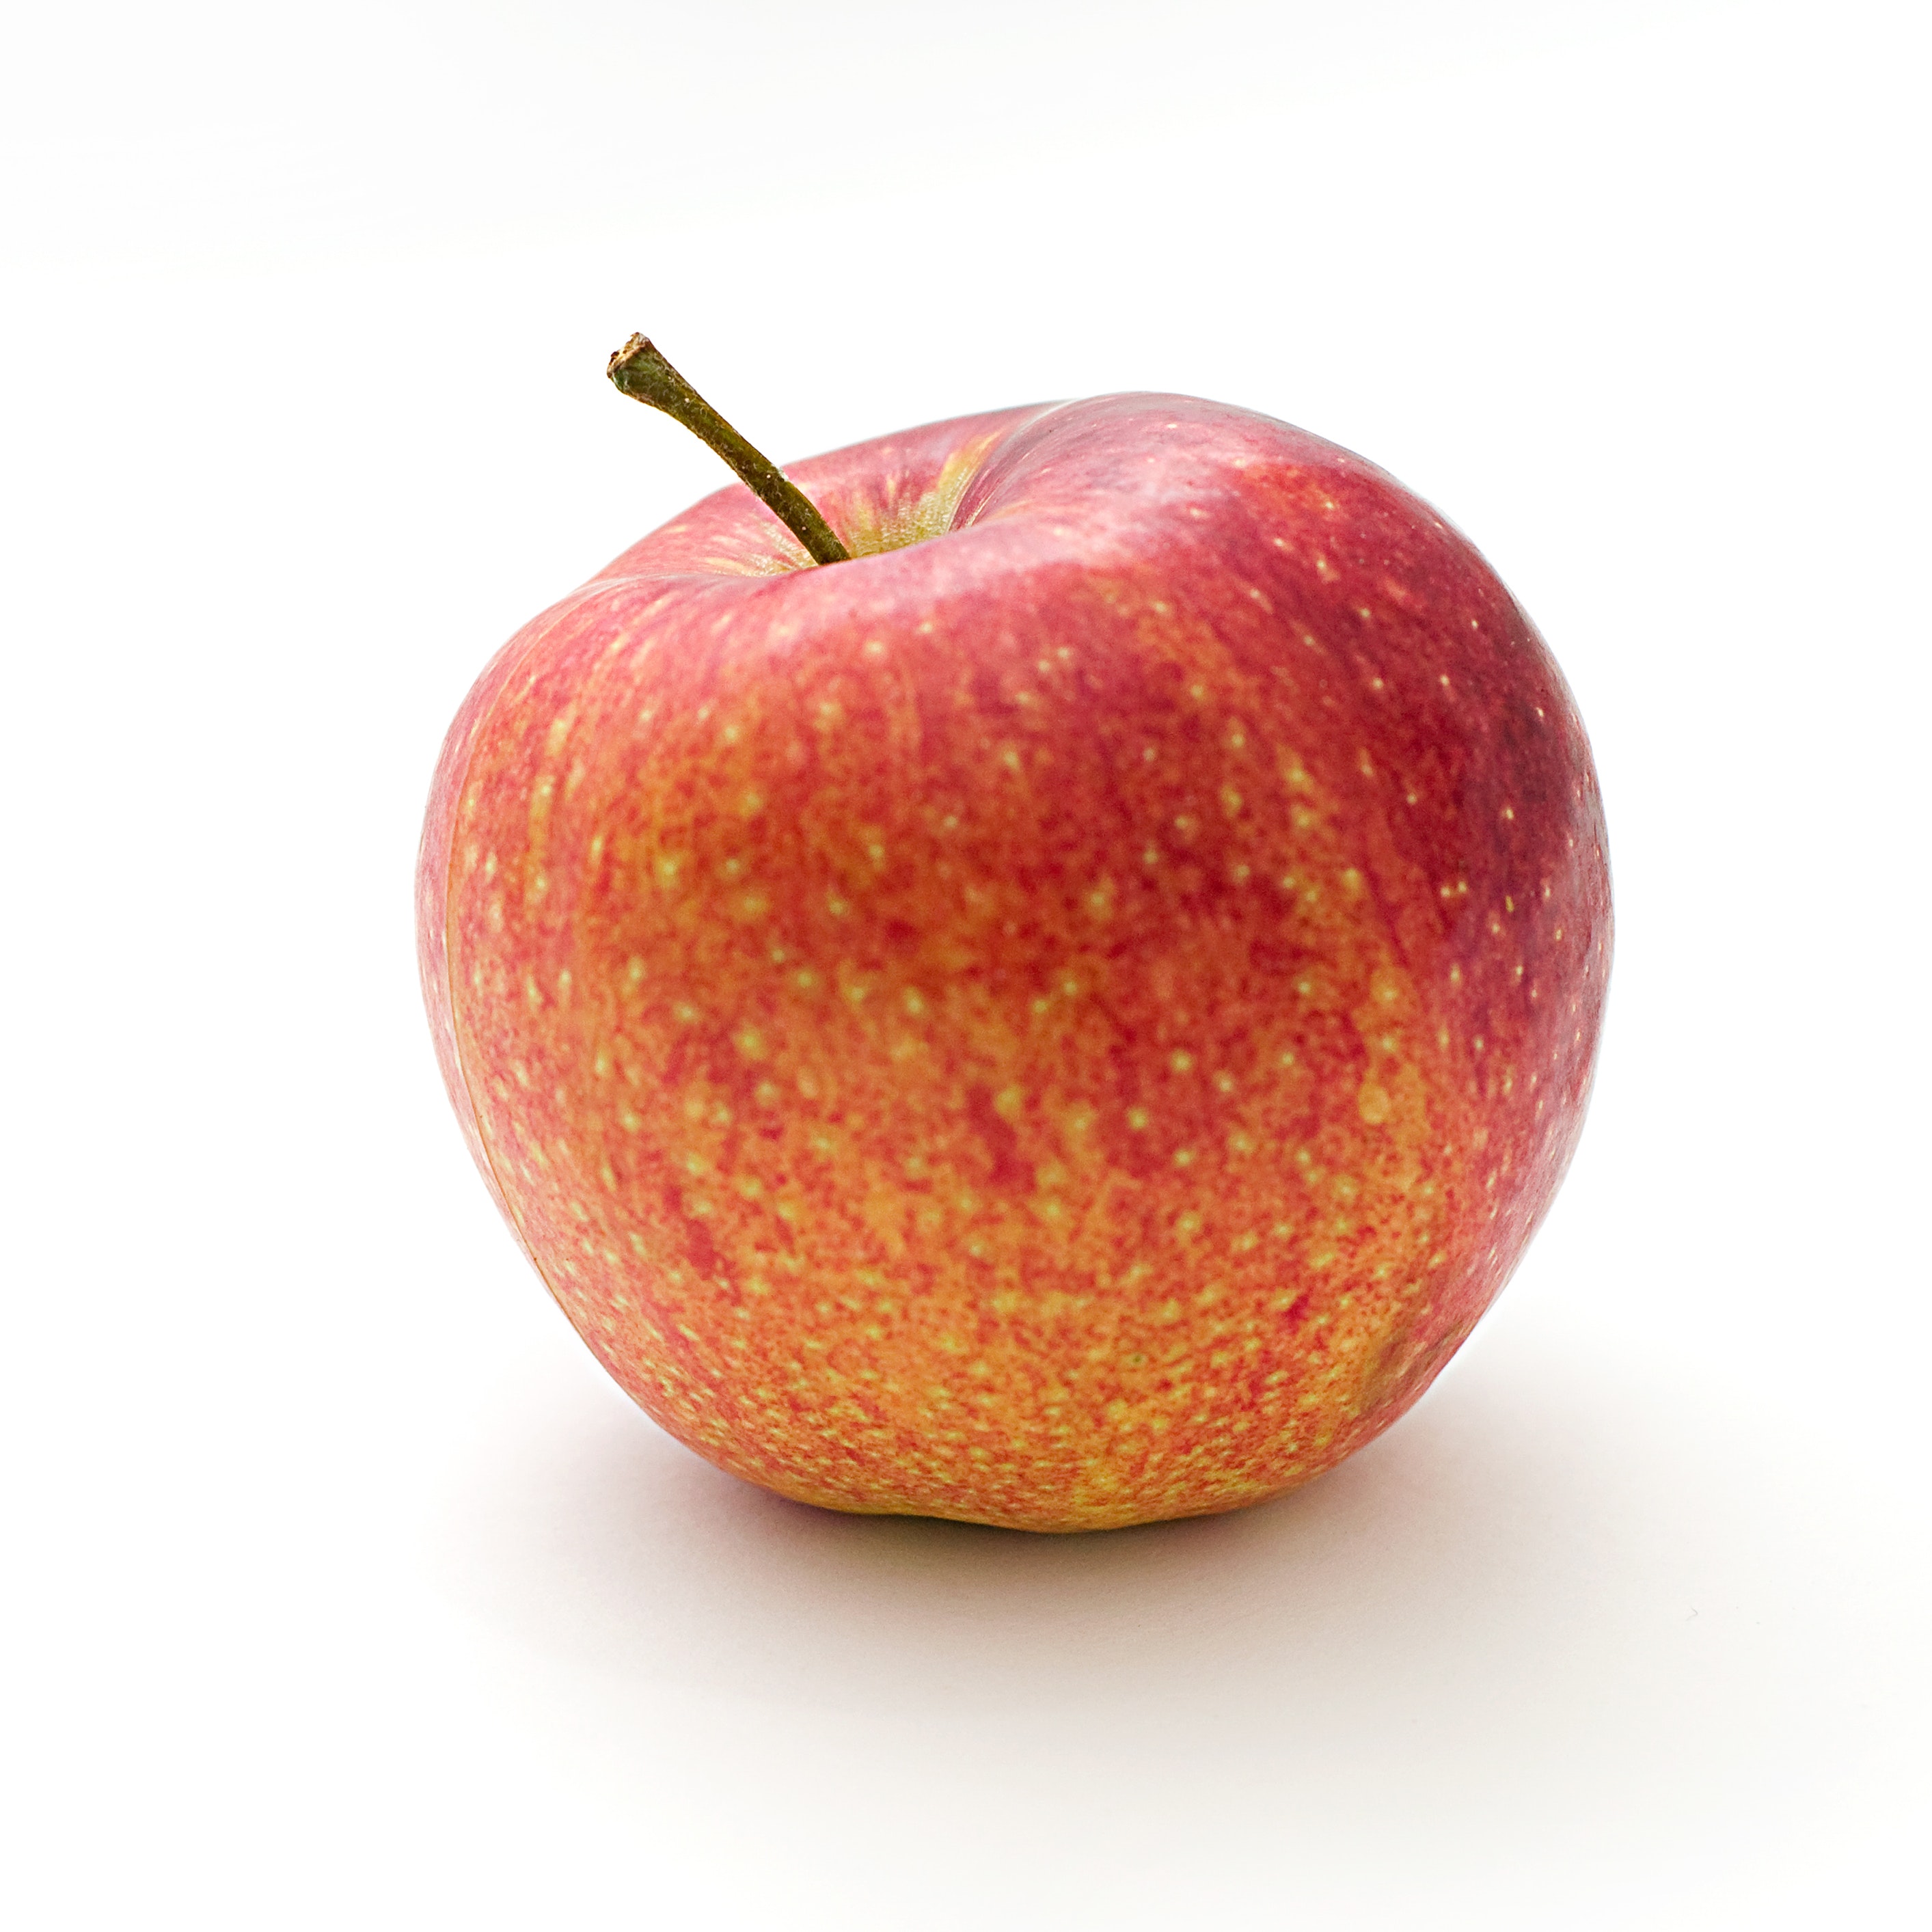 Image fruit - red apple - free printable images - Img 27812.